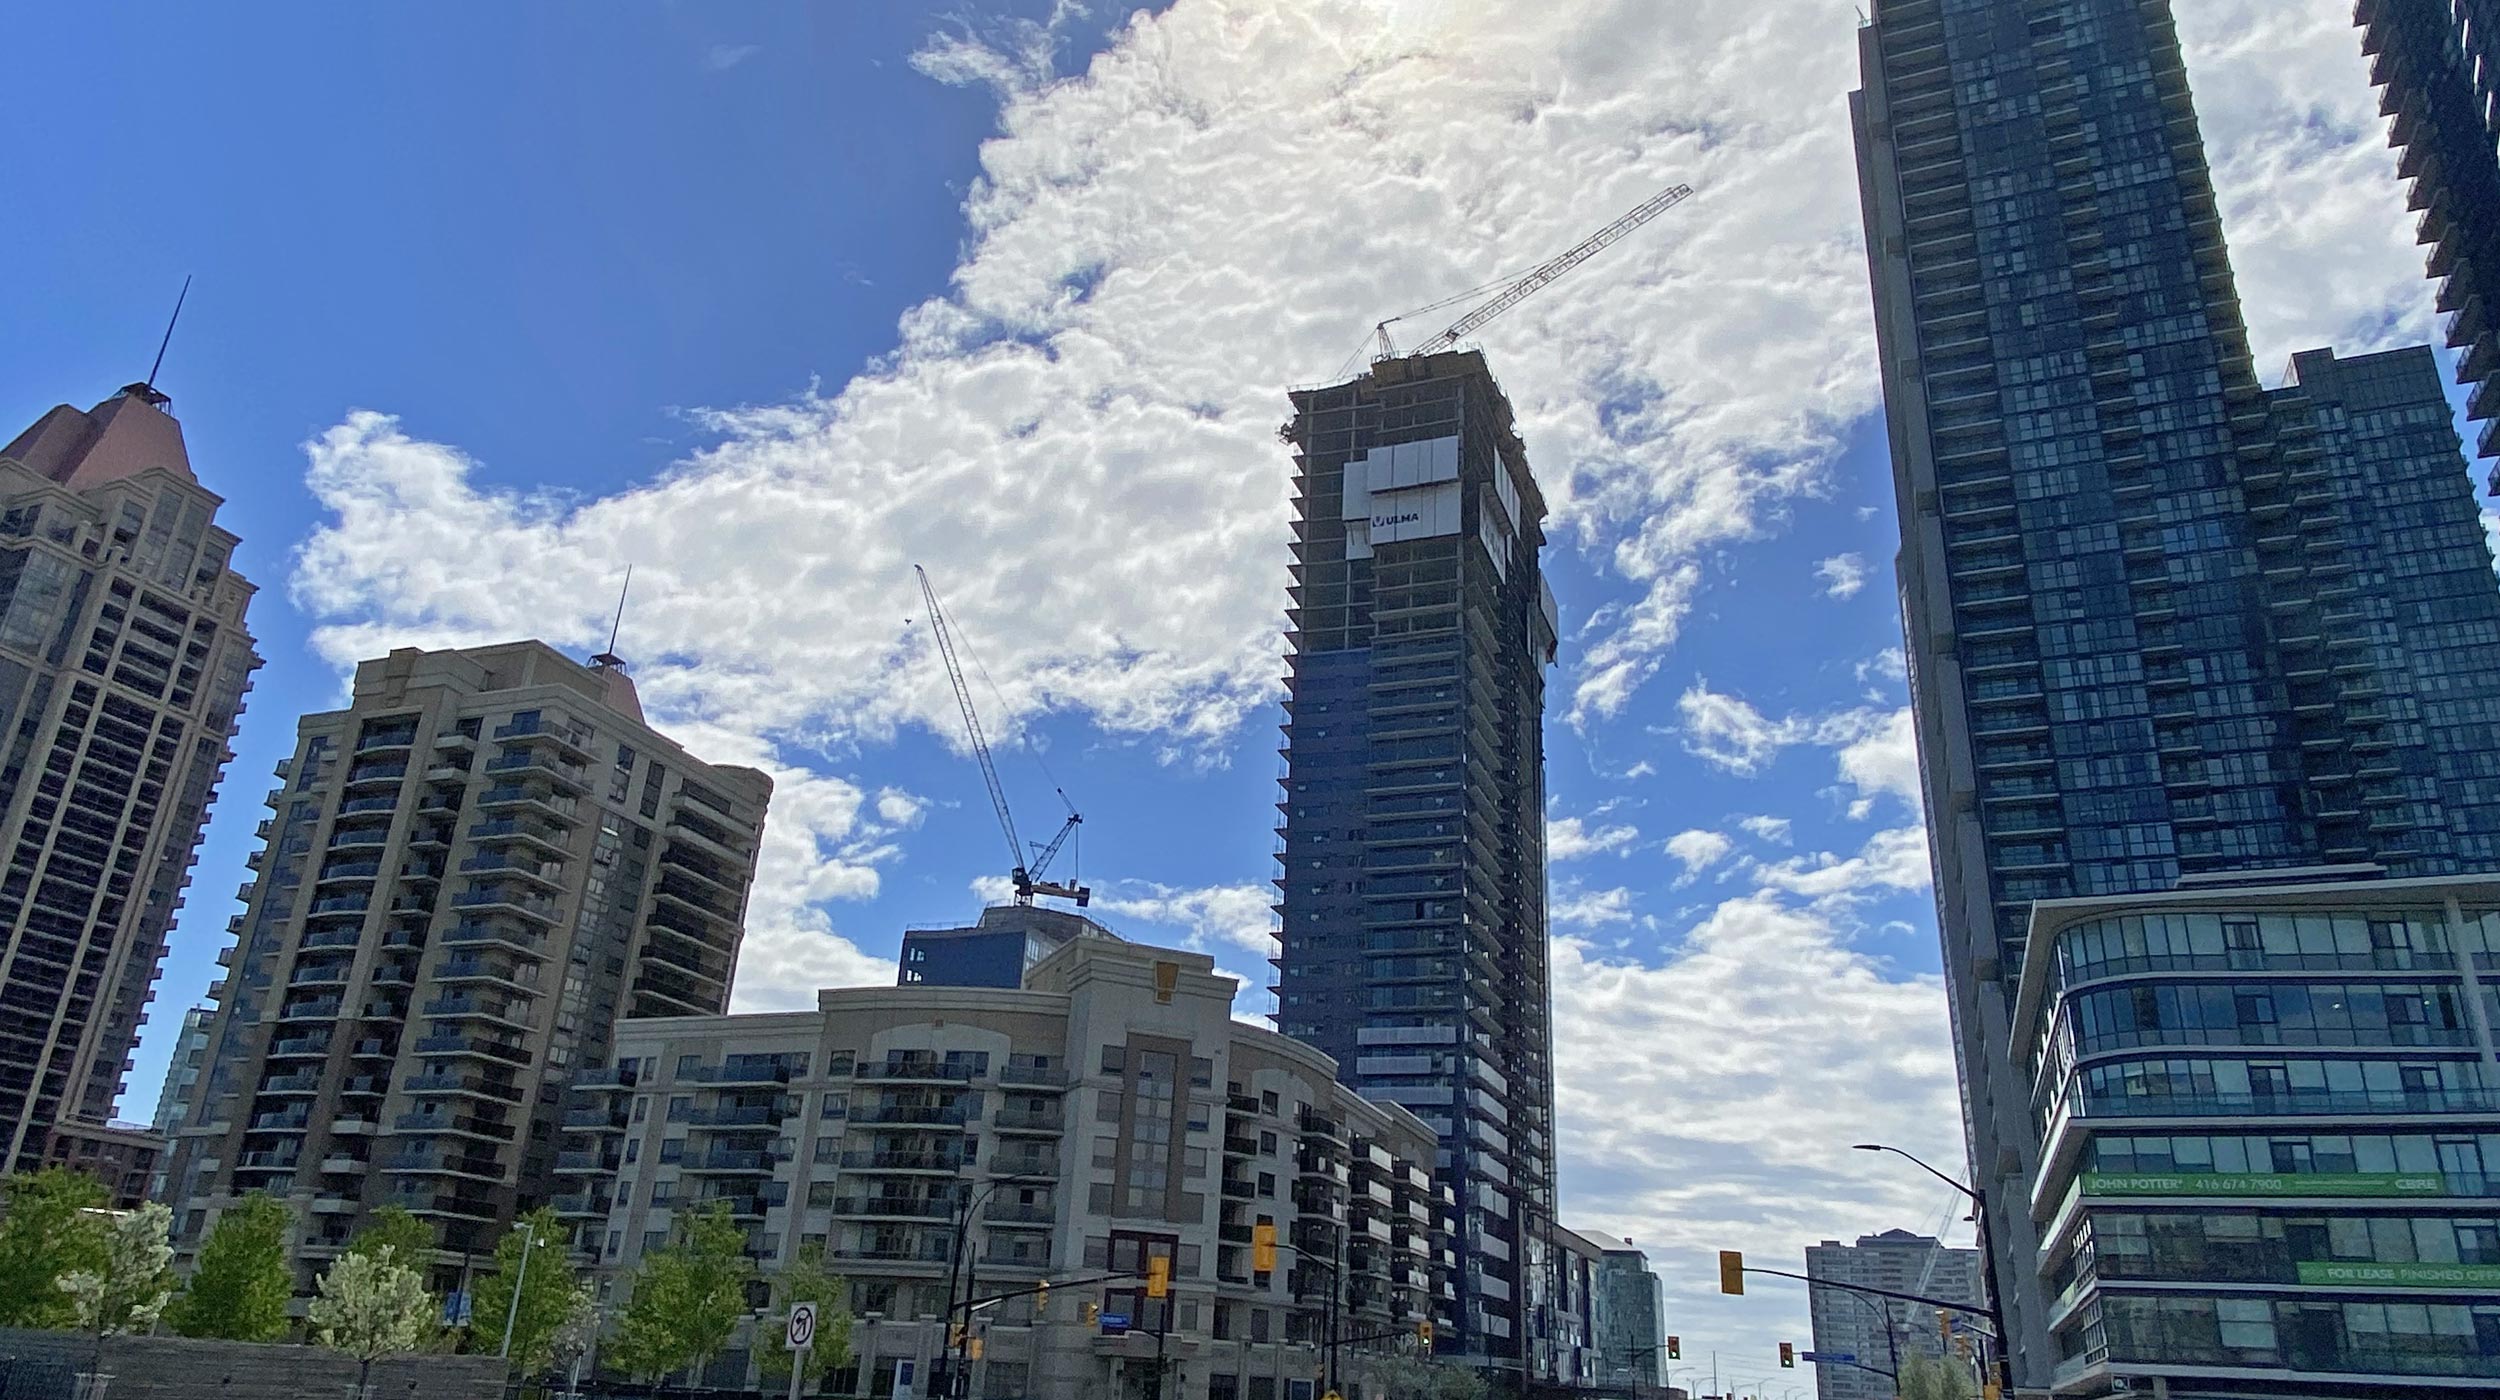 This project consists of two towers, a 43 story and 20 story with 3 levels of shared underground parking, with stunning views, sophisticated features, and amenities.